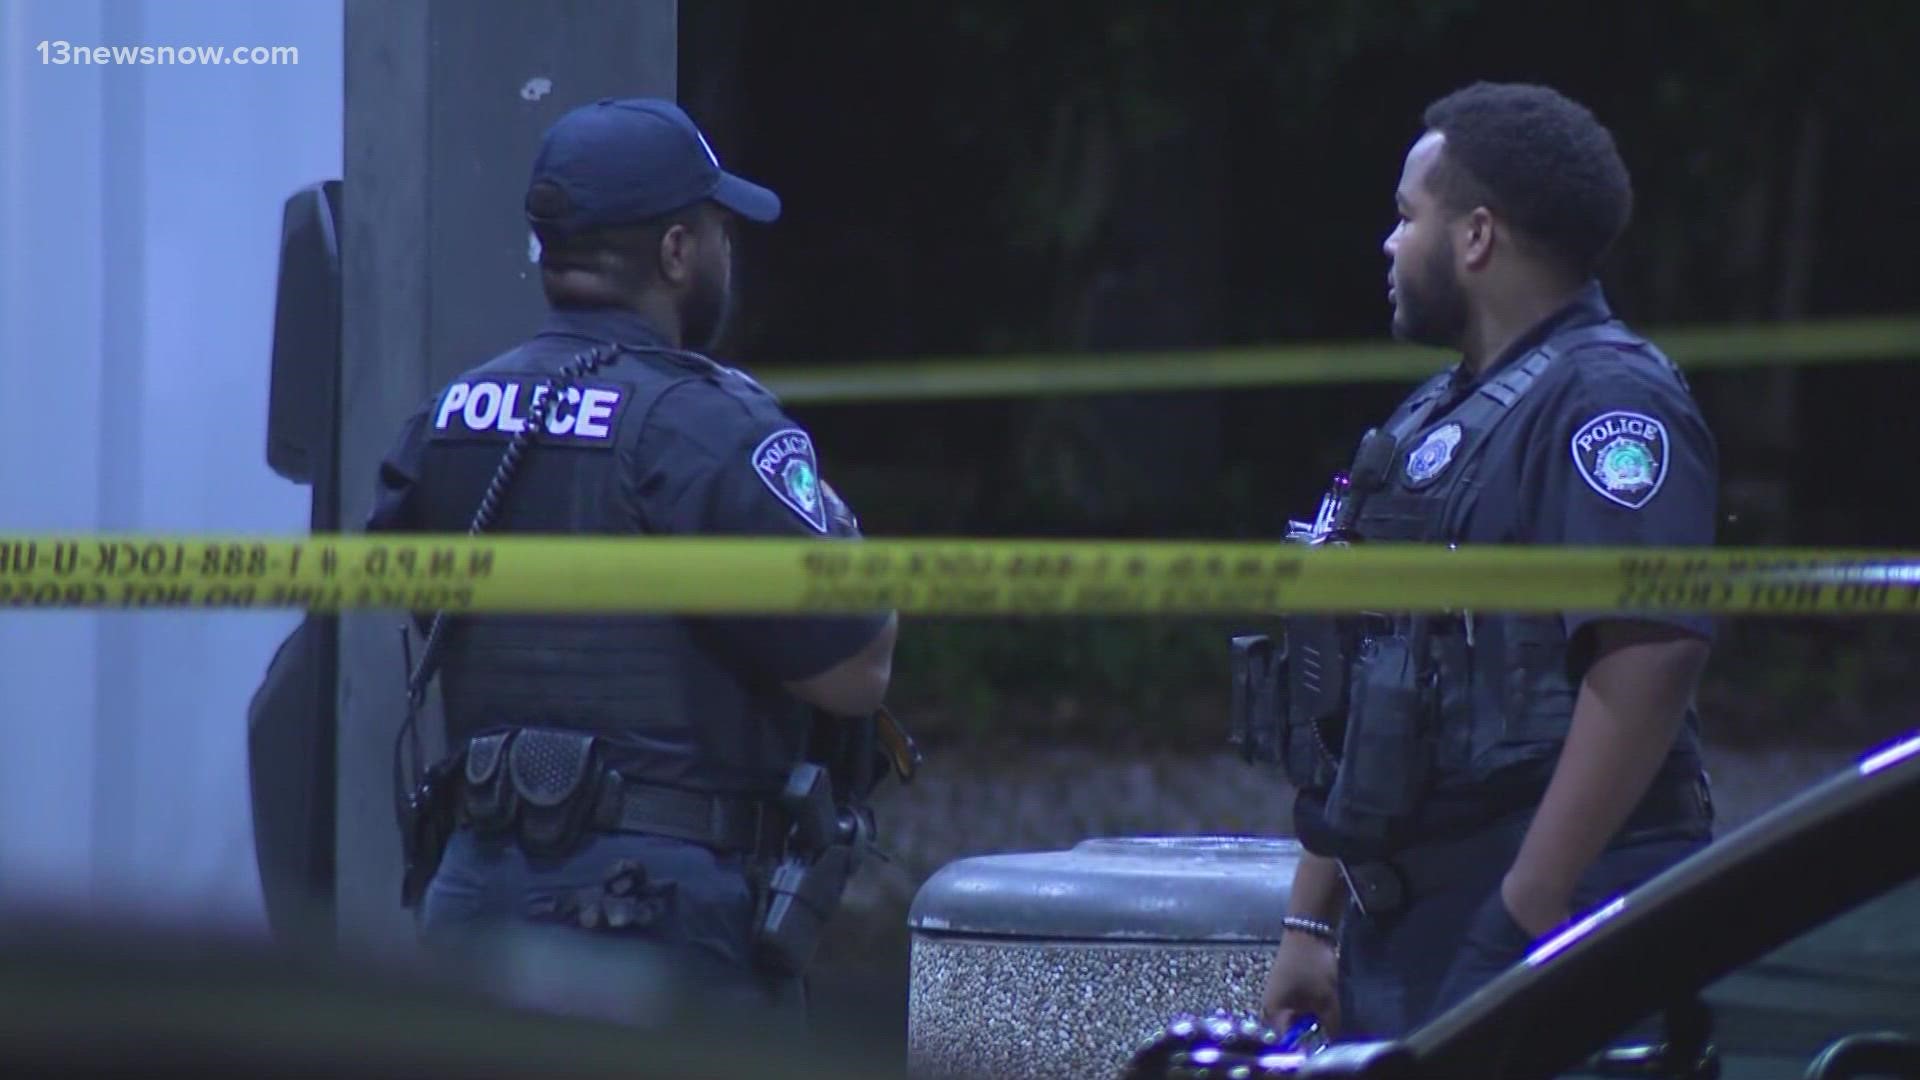 Last year, Hampton Roads hit 100 homicides a full month later, in mid-July. In 2020 and 2019, the area recorded 100 homicides by August.